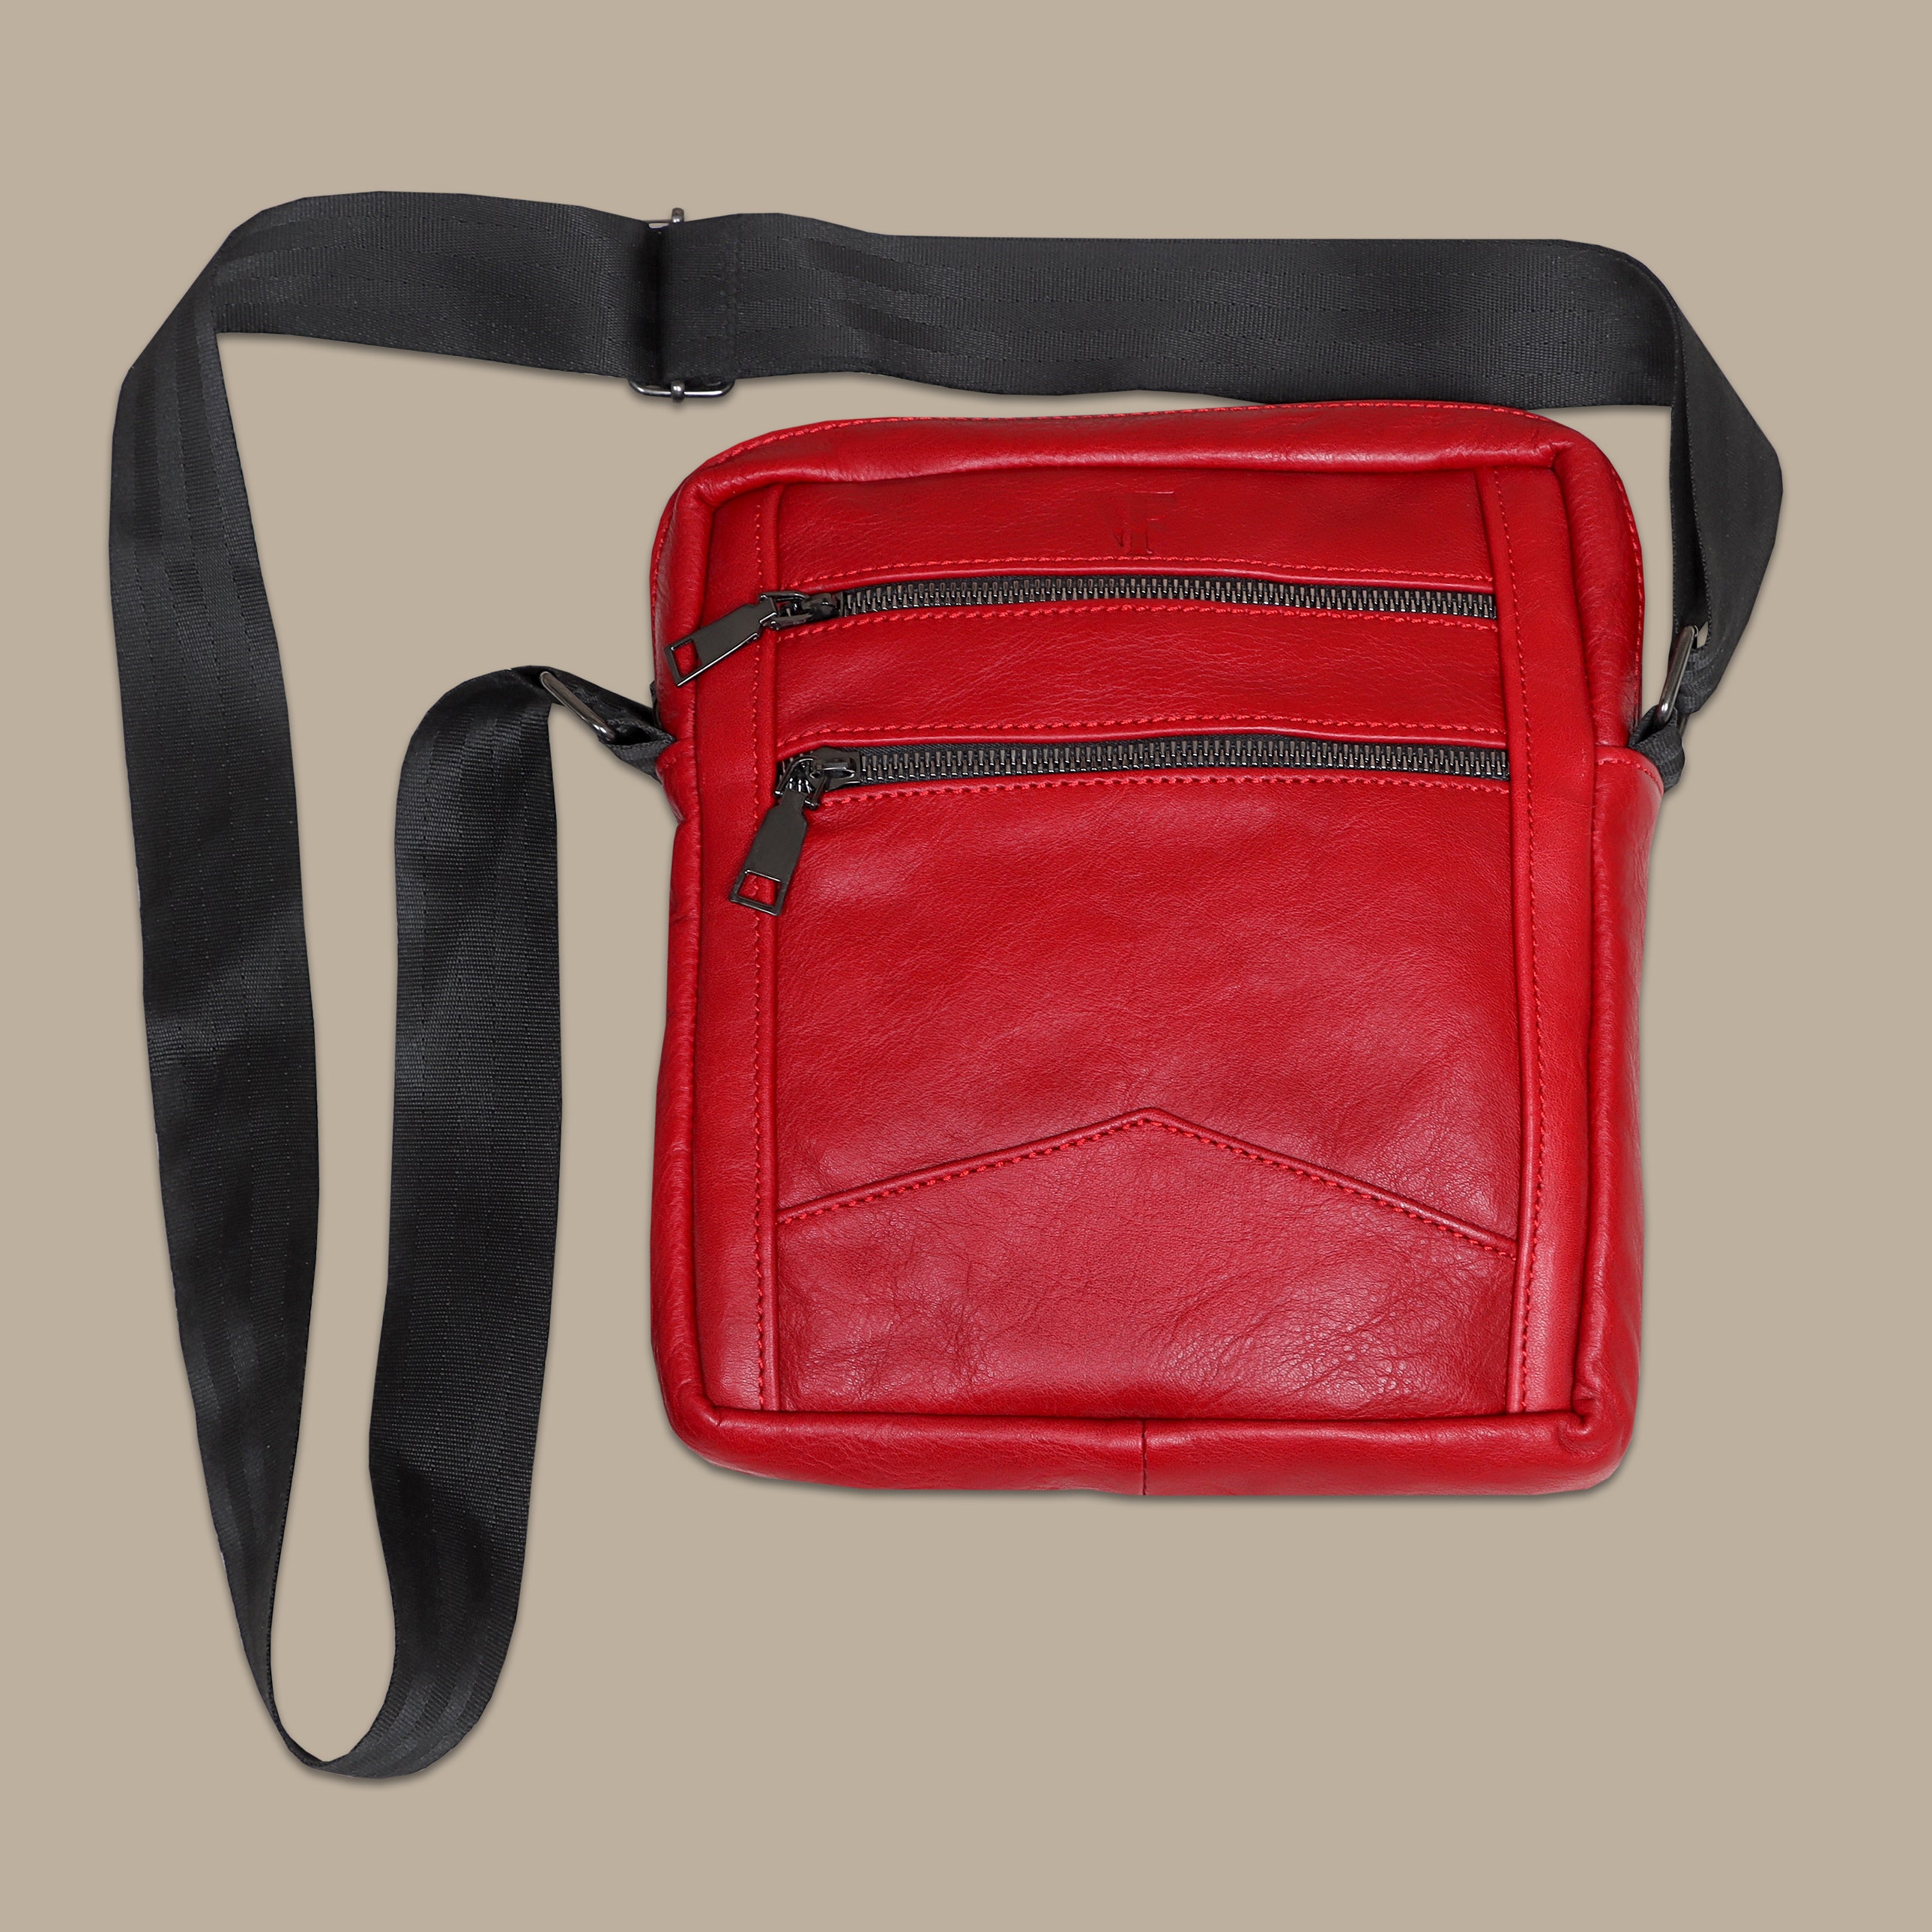 Red Elegance: Stylish Cross Bag with Back Zippers and Belt Accent